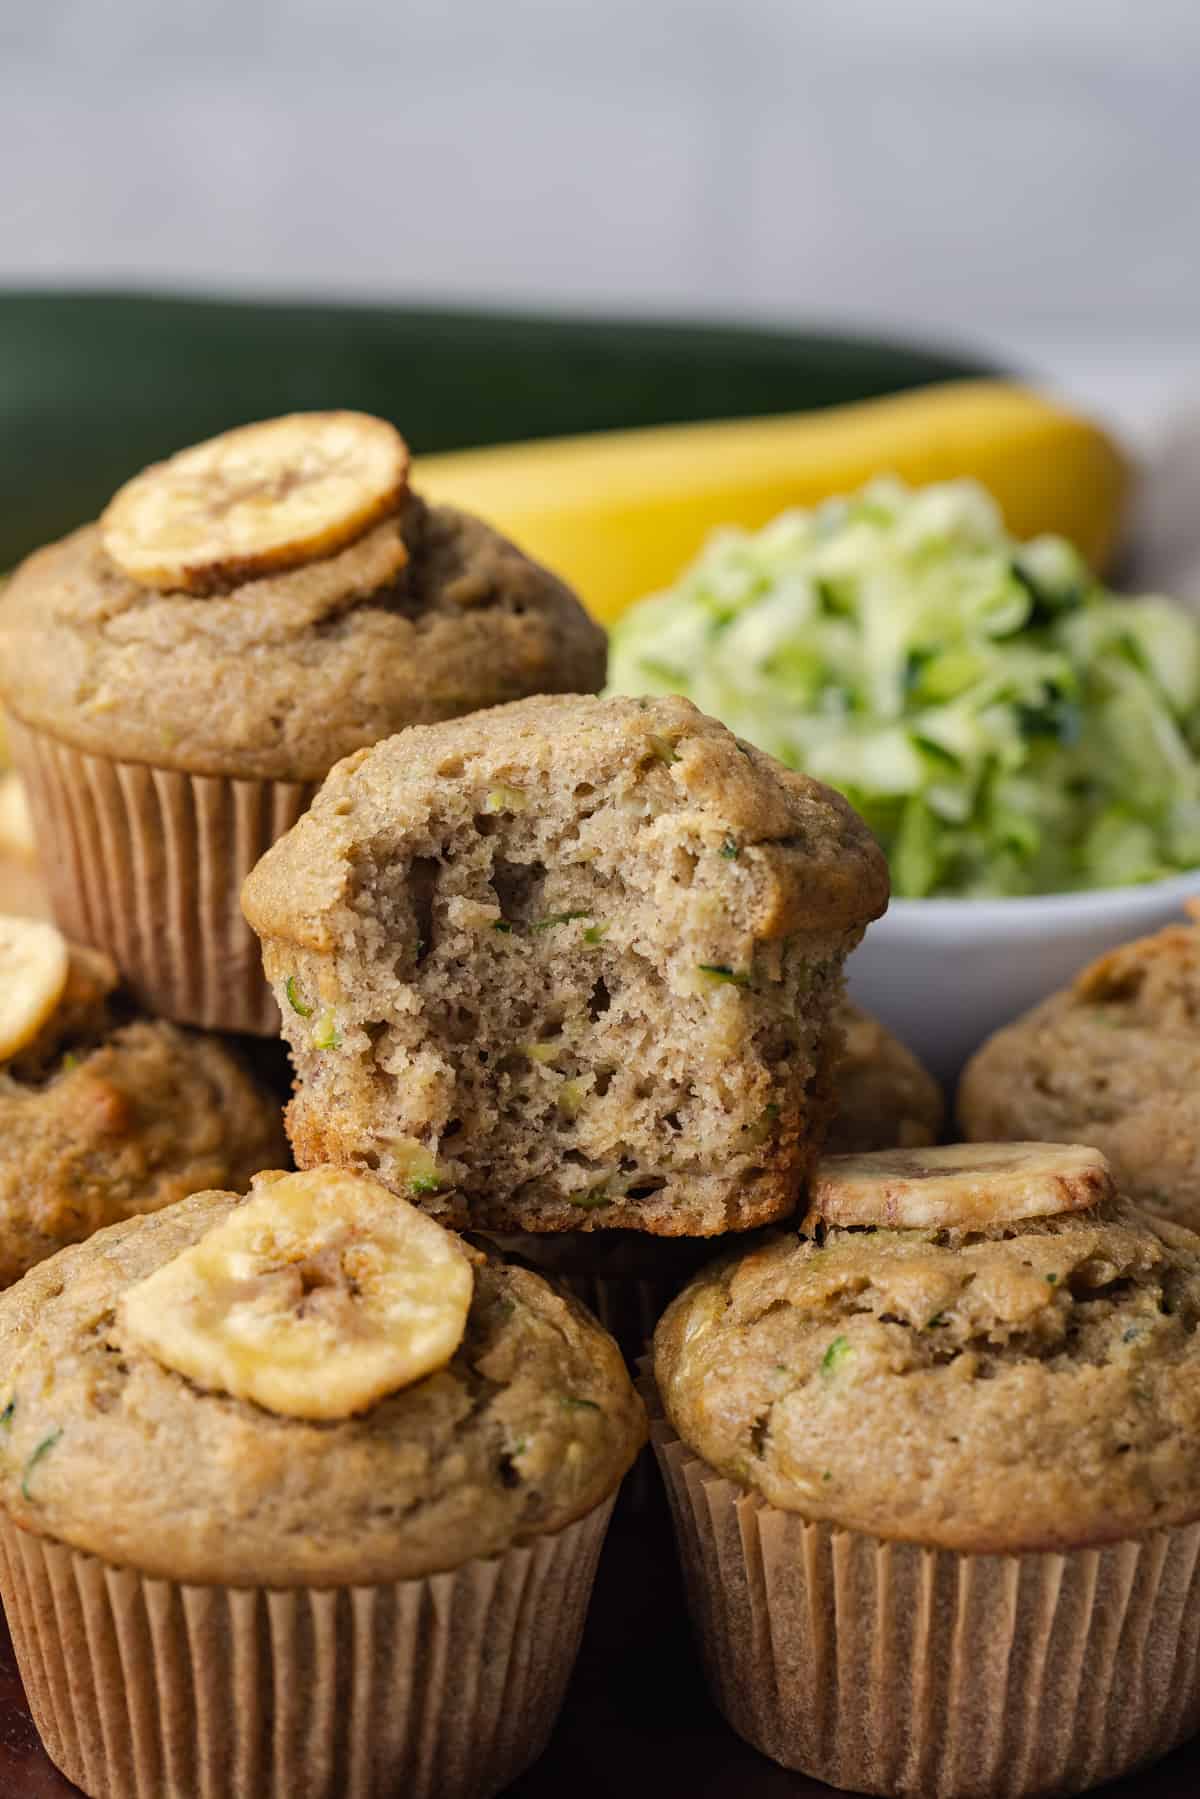 Zucchini banana muffins stacked with a bite taken out of the top one so the fluffy inside is visible.